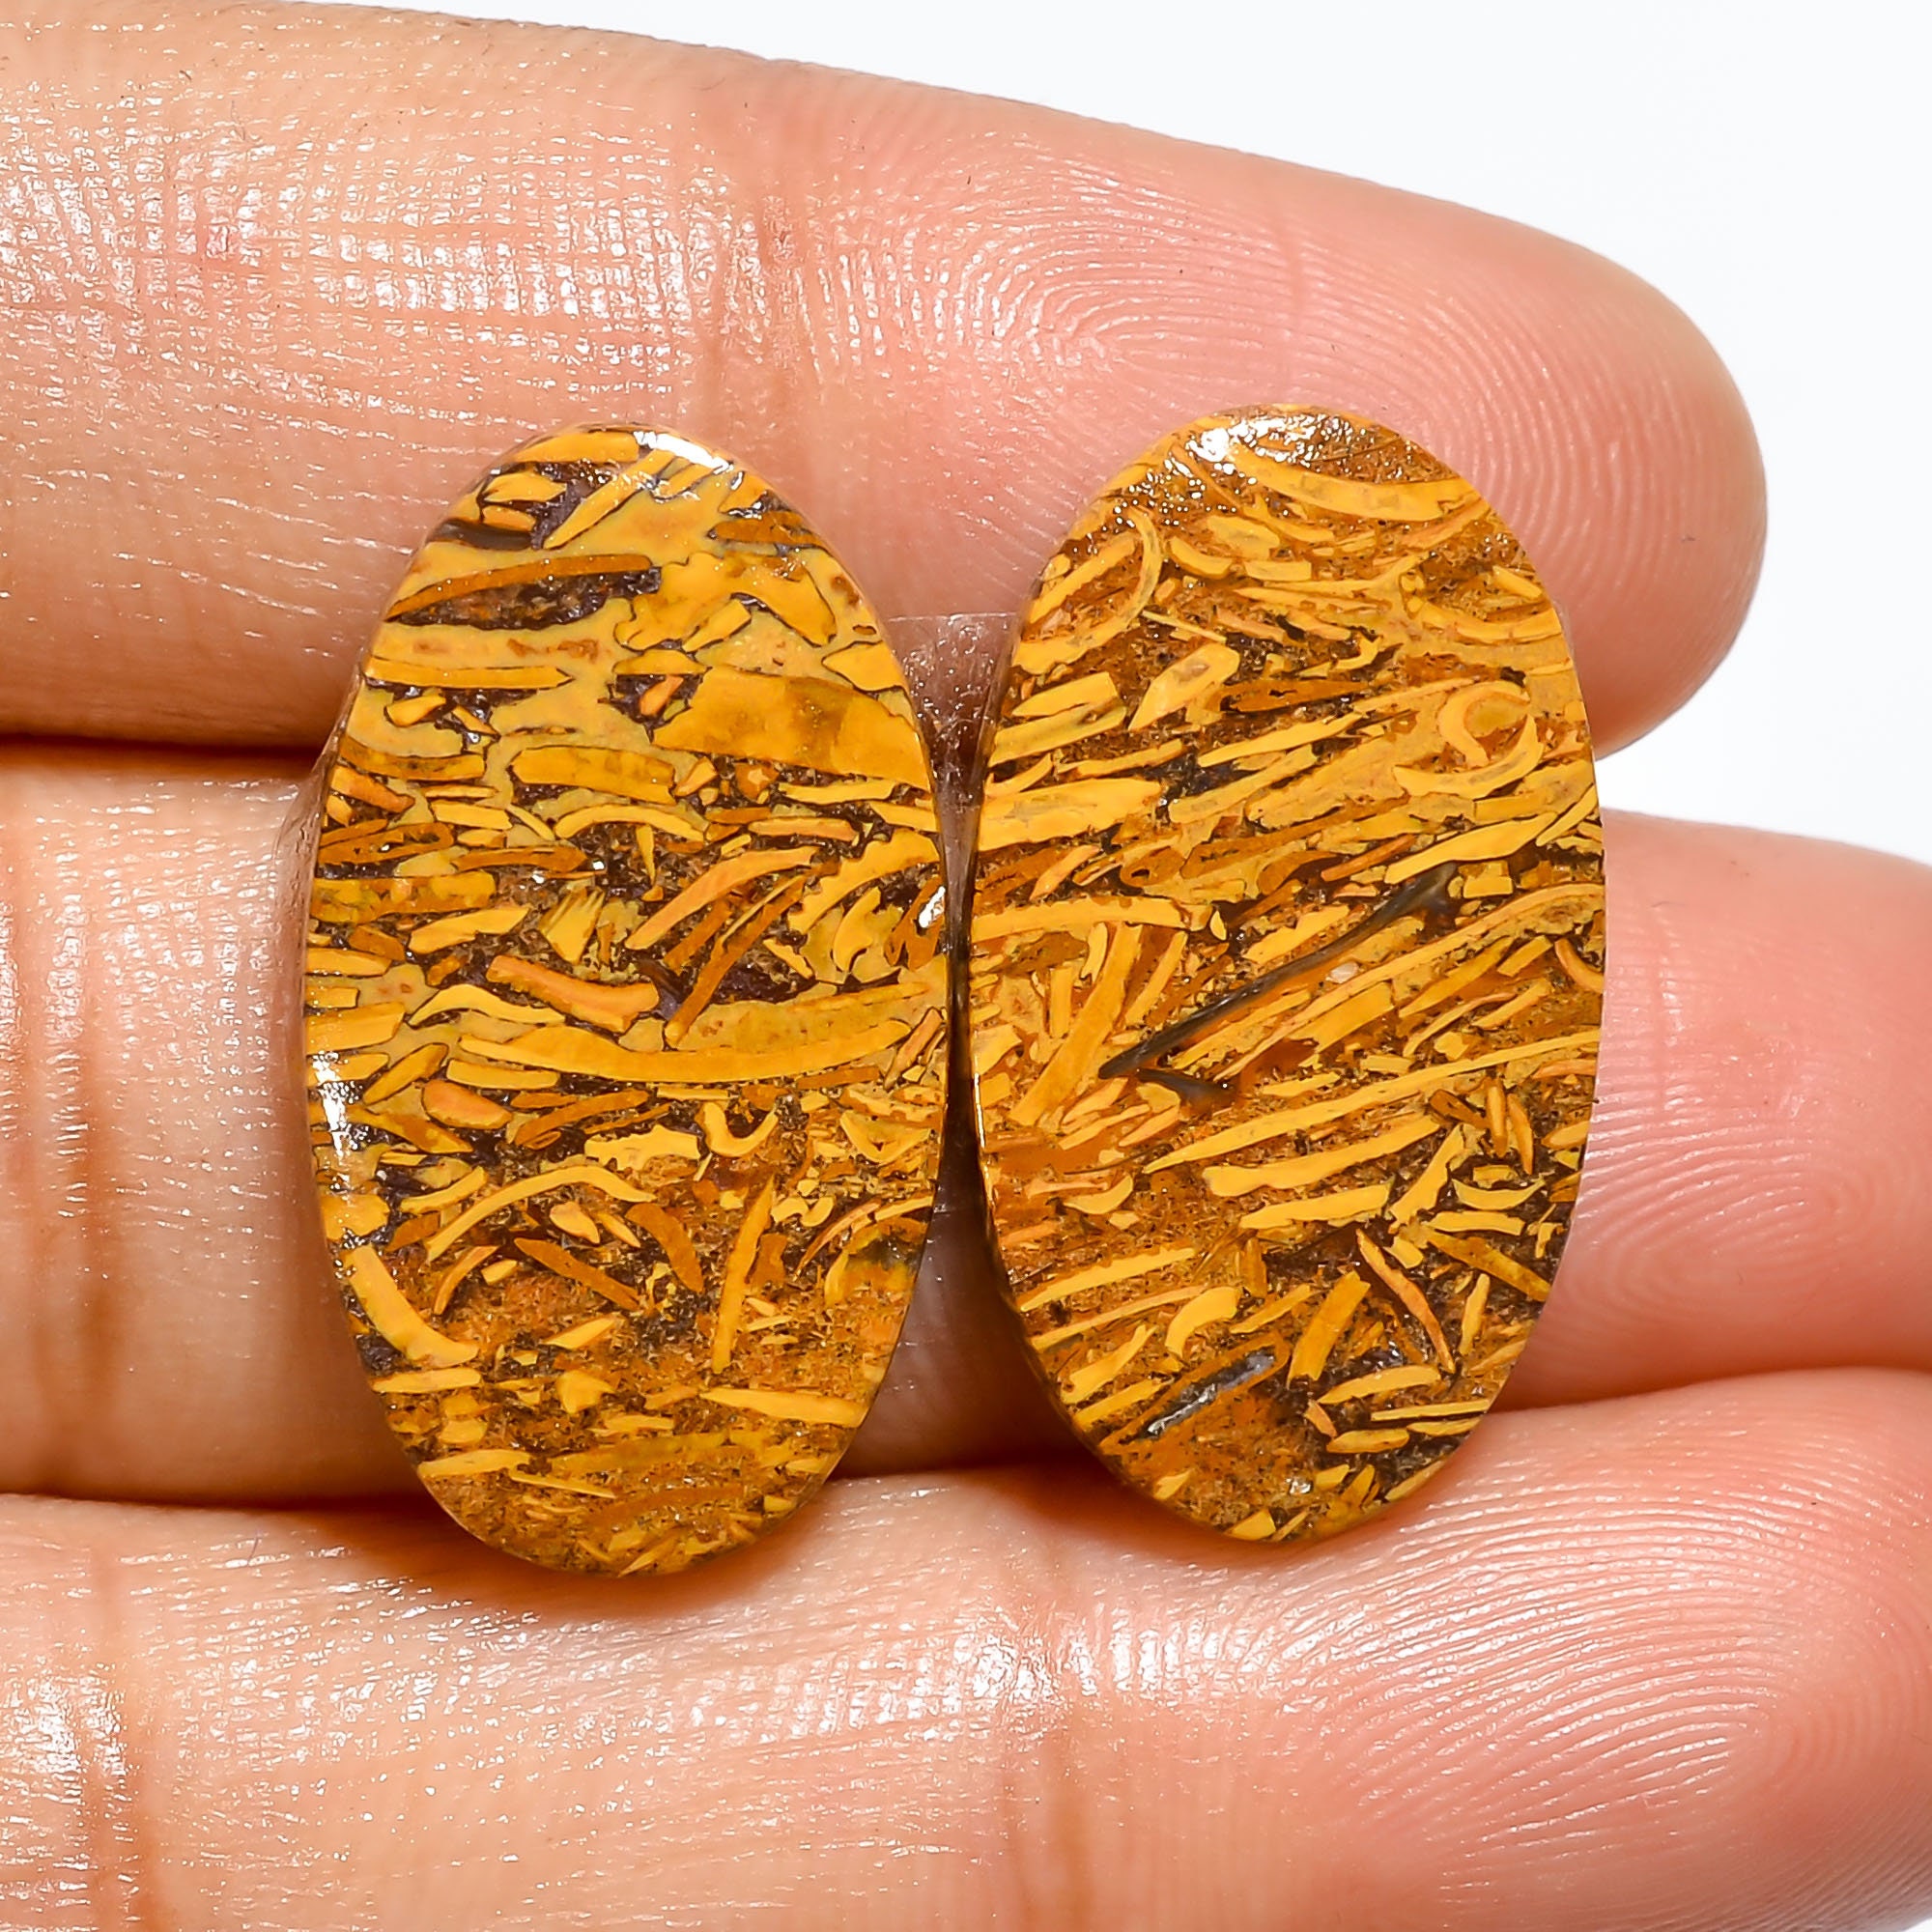 22X14X4mm AA1251 Mind Blowing A One Quality 100% Natural Mariam Jasper Fancy Shape Cabochon Loose Gemstone Pair For Making Earrings 19.5 Ct